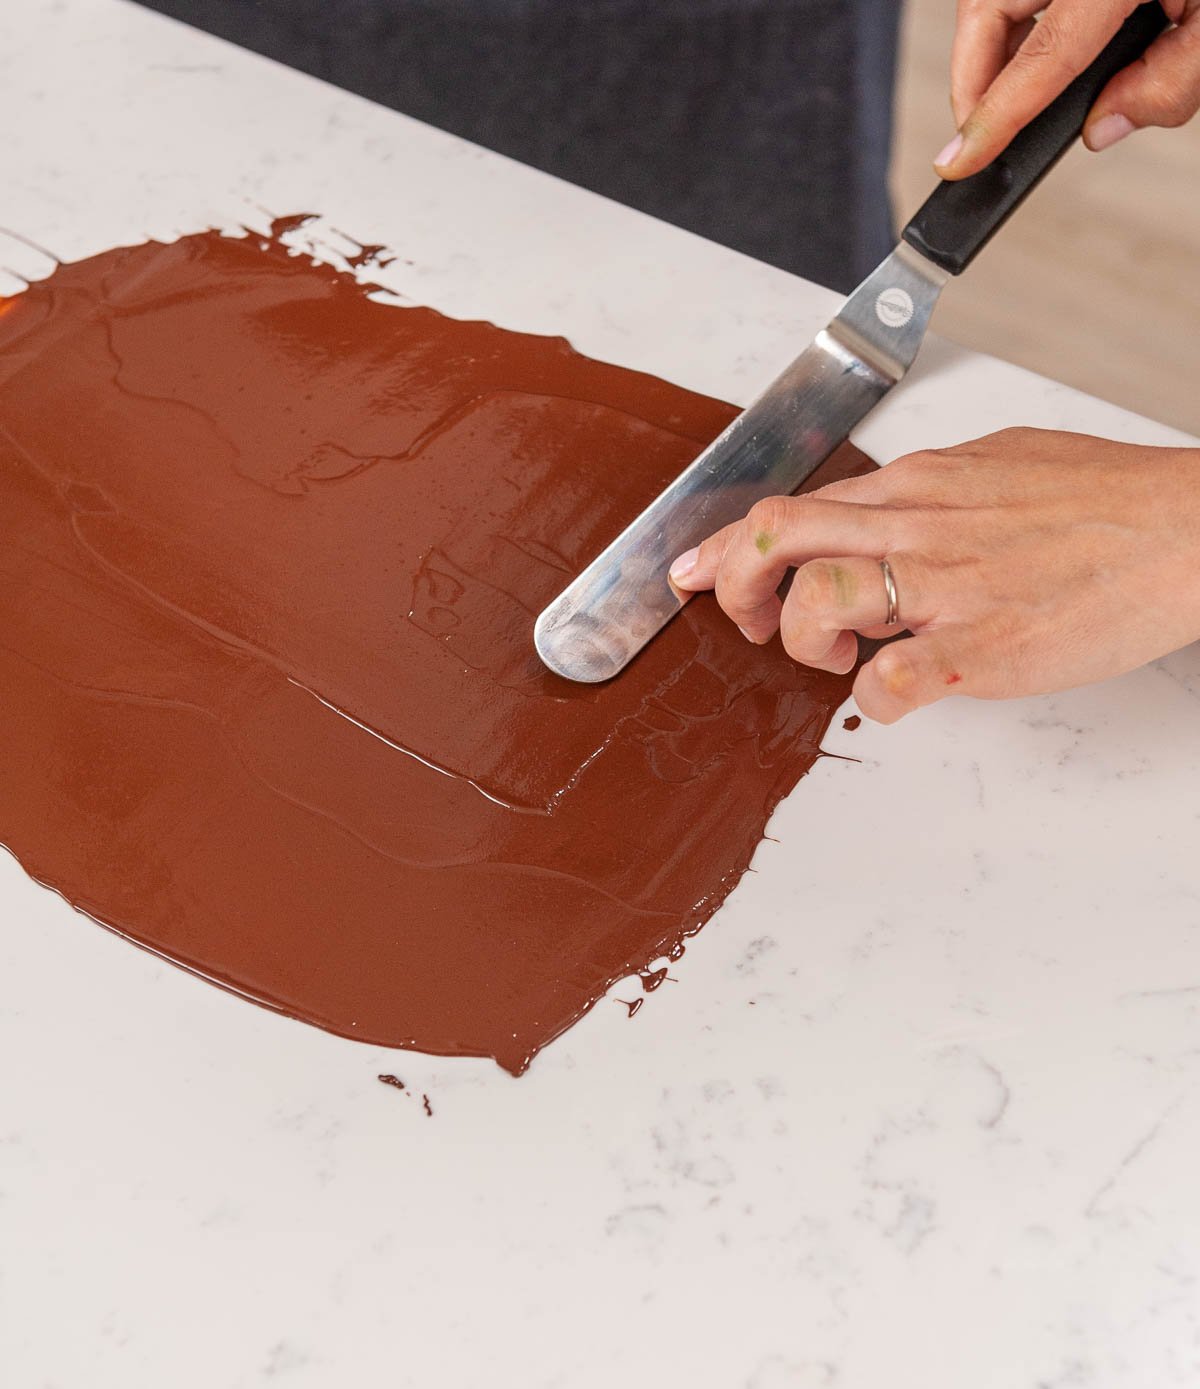 spreading chocolate on acetate with an offset spatula